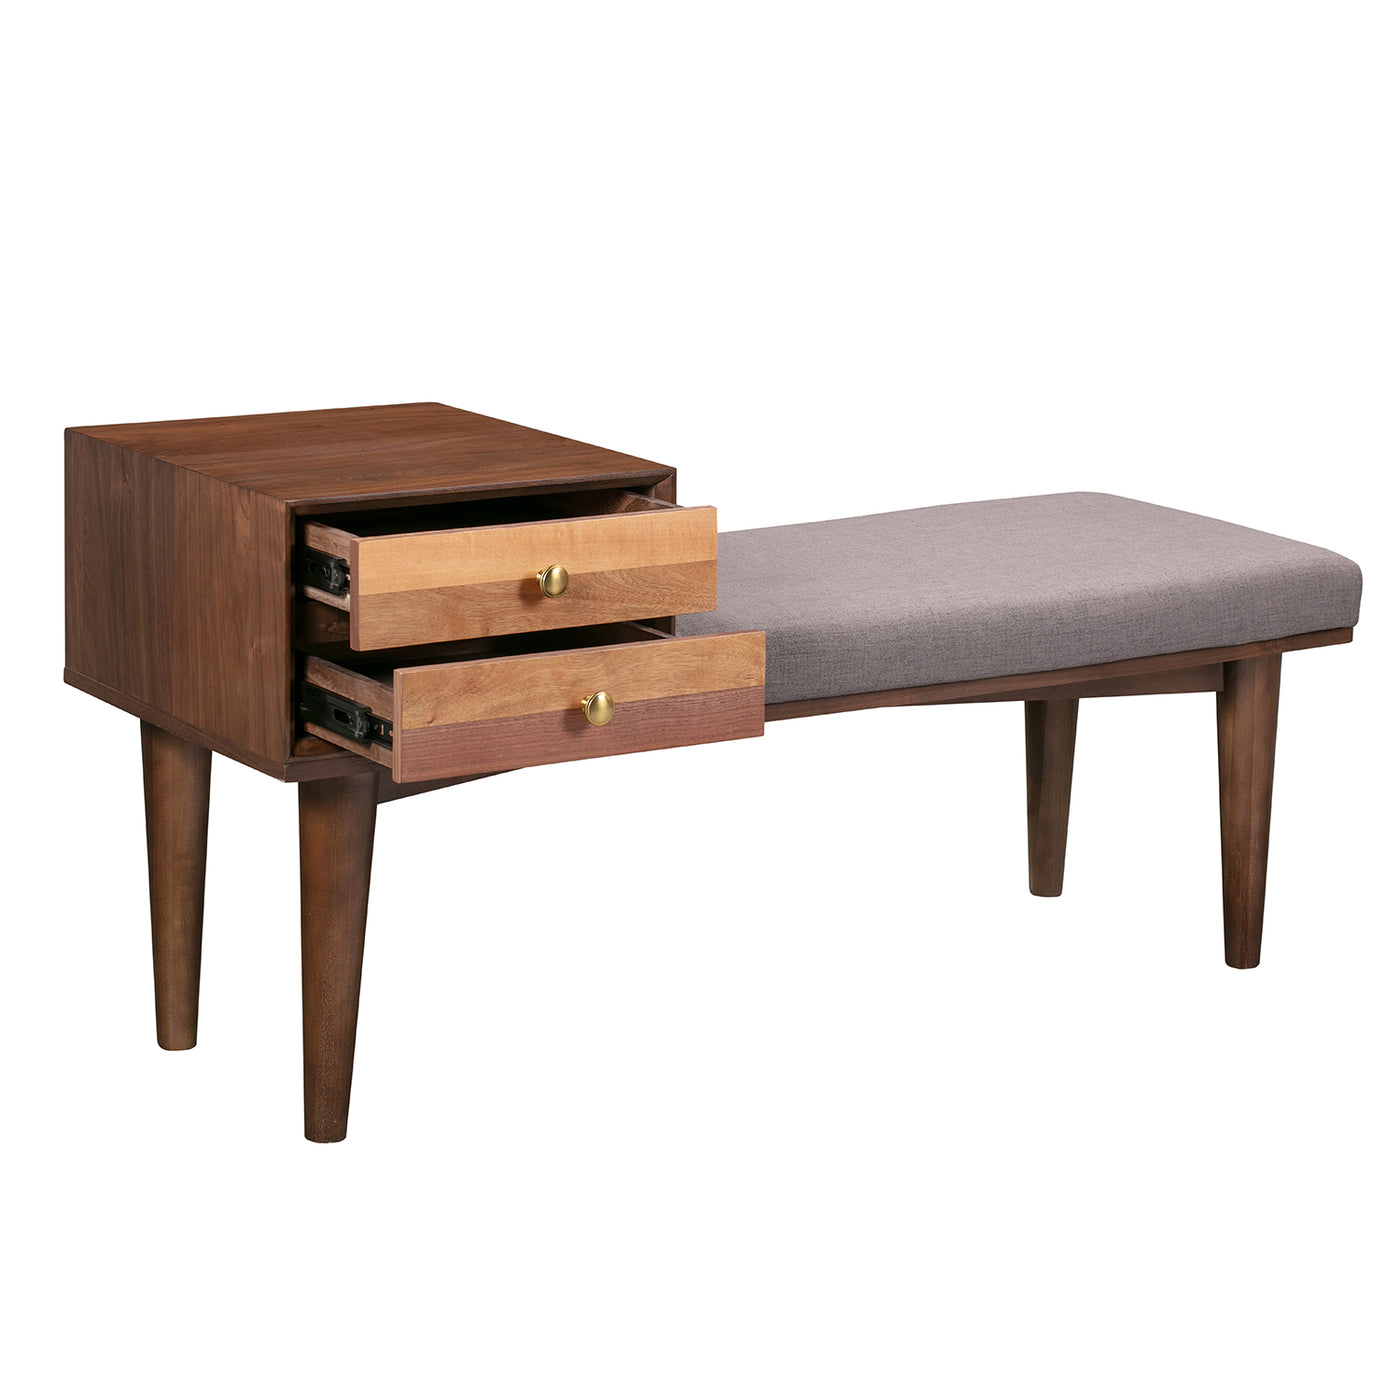 Sepia Wooden Bench in Brown and Multi-Tone Finish